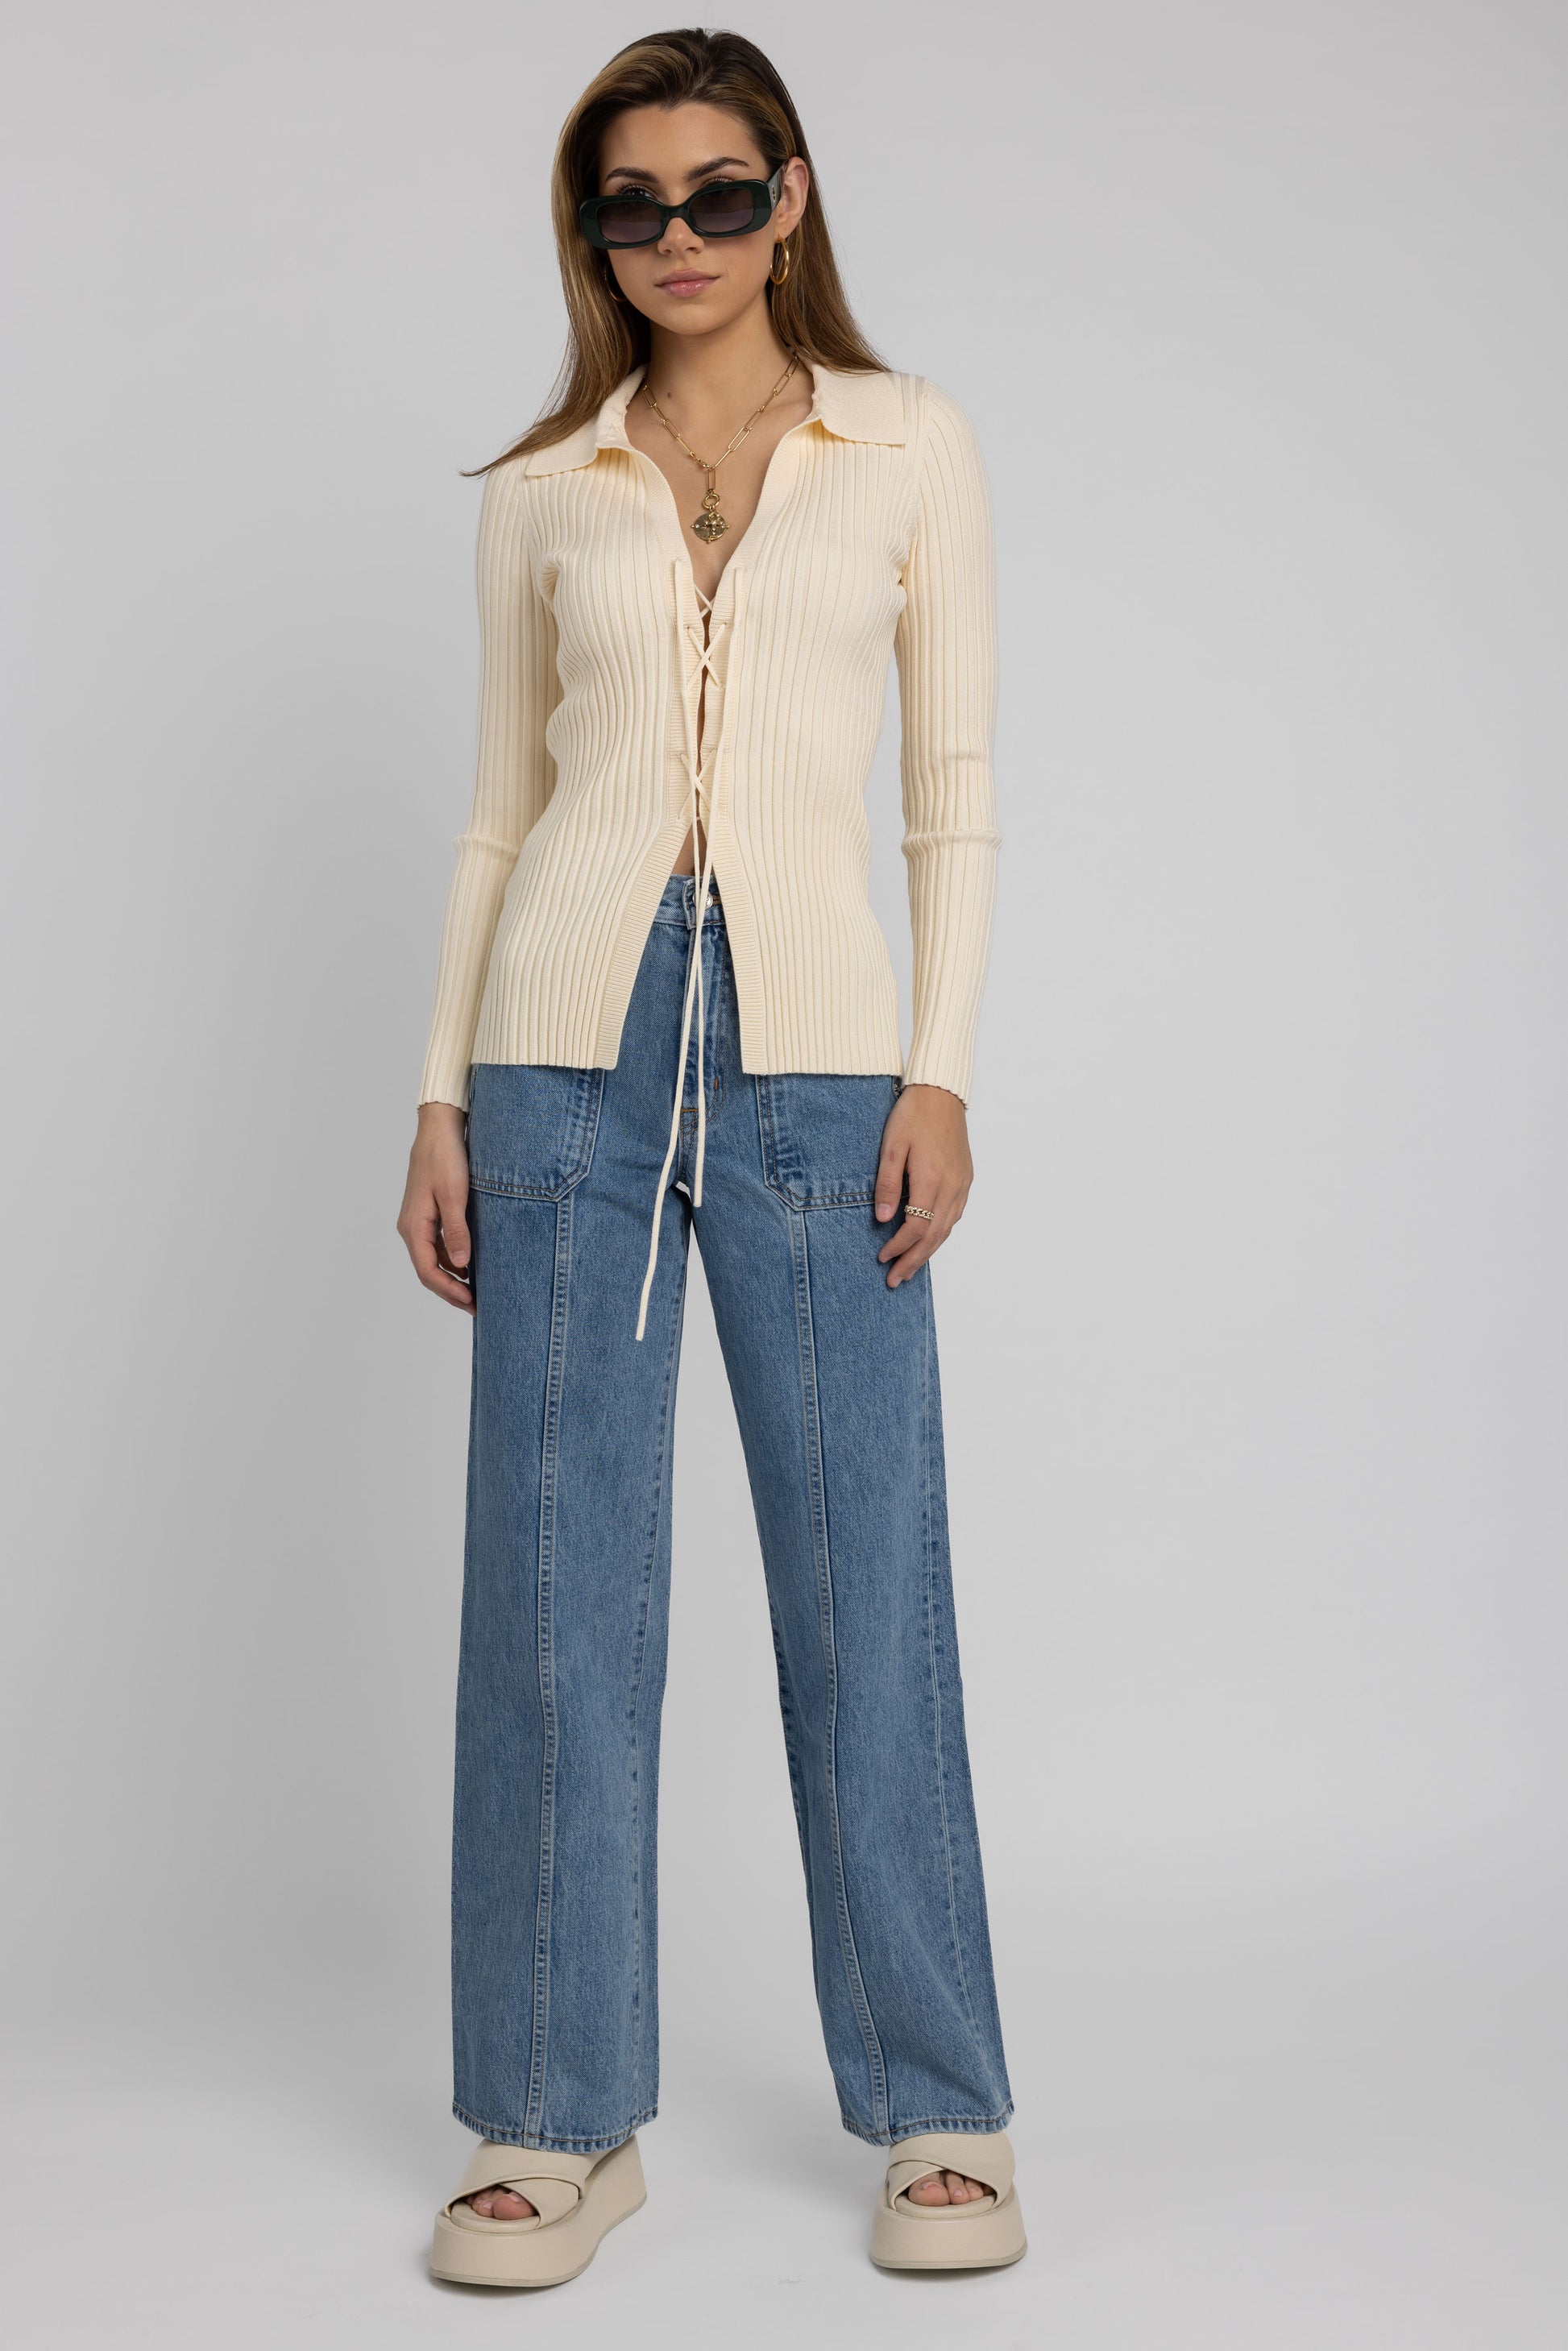 THE RANGE Viscose Knit Laced Cardigan in Light Shell